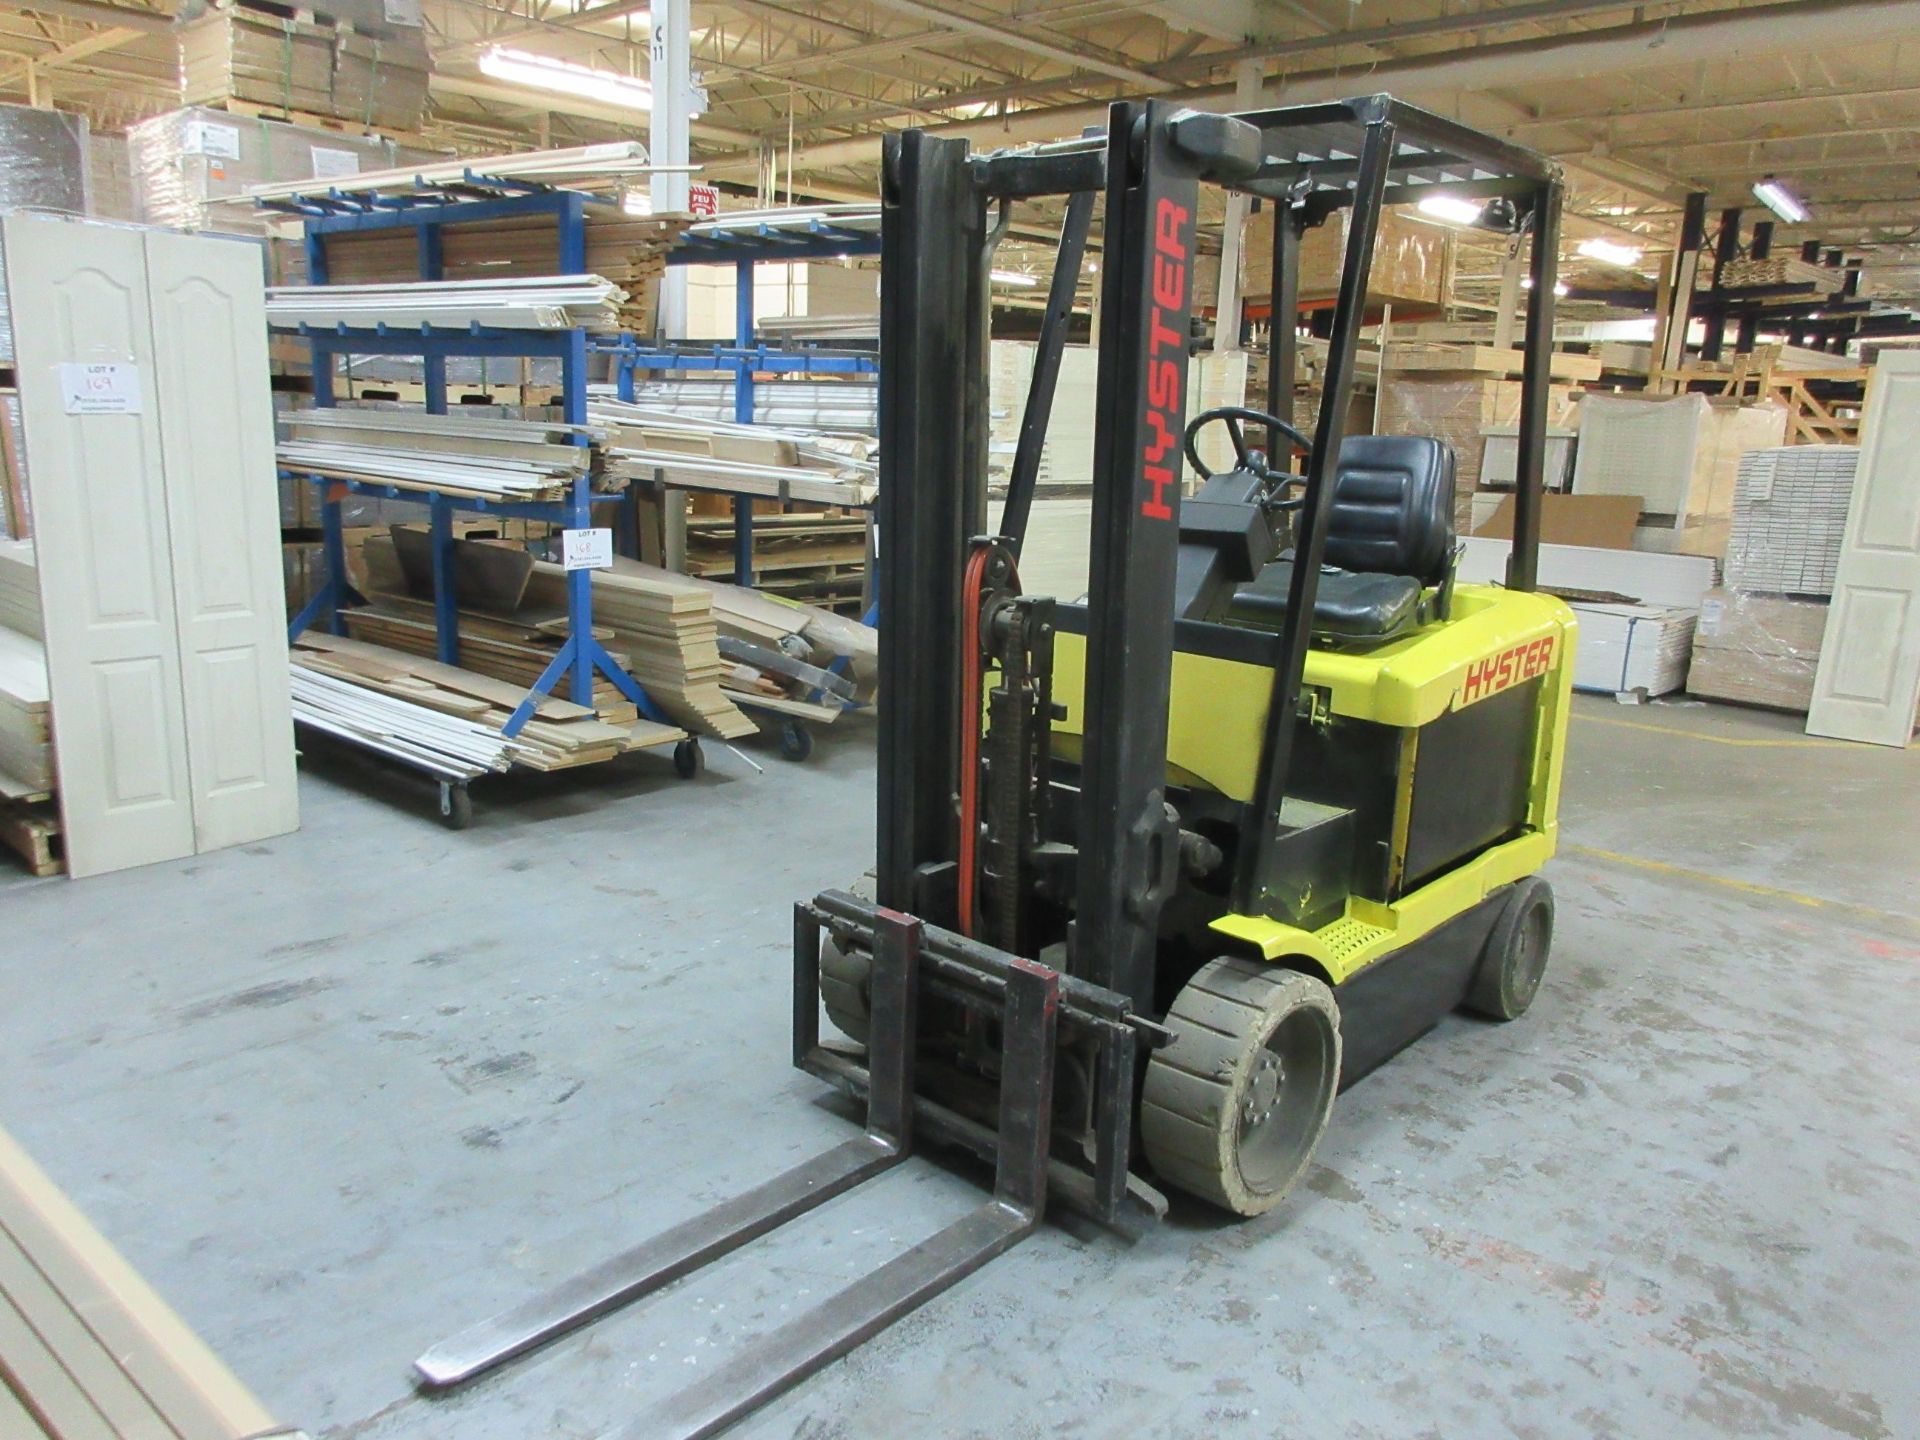 HYSTER Electric forklift Mod: E60XM-33, 2 sections, side shift, 36 volts w/t Ferro Five EFR - Image 2 of 14